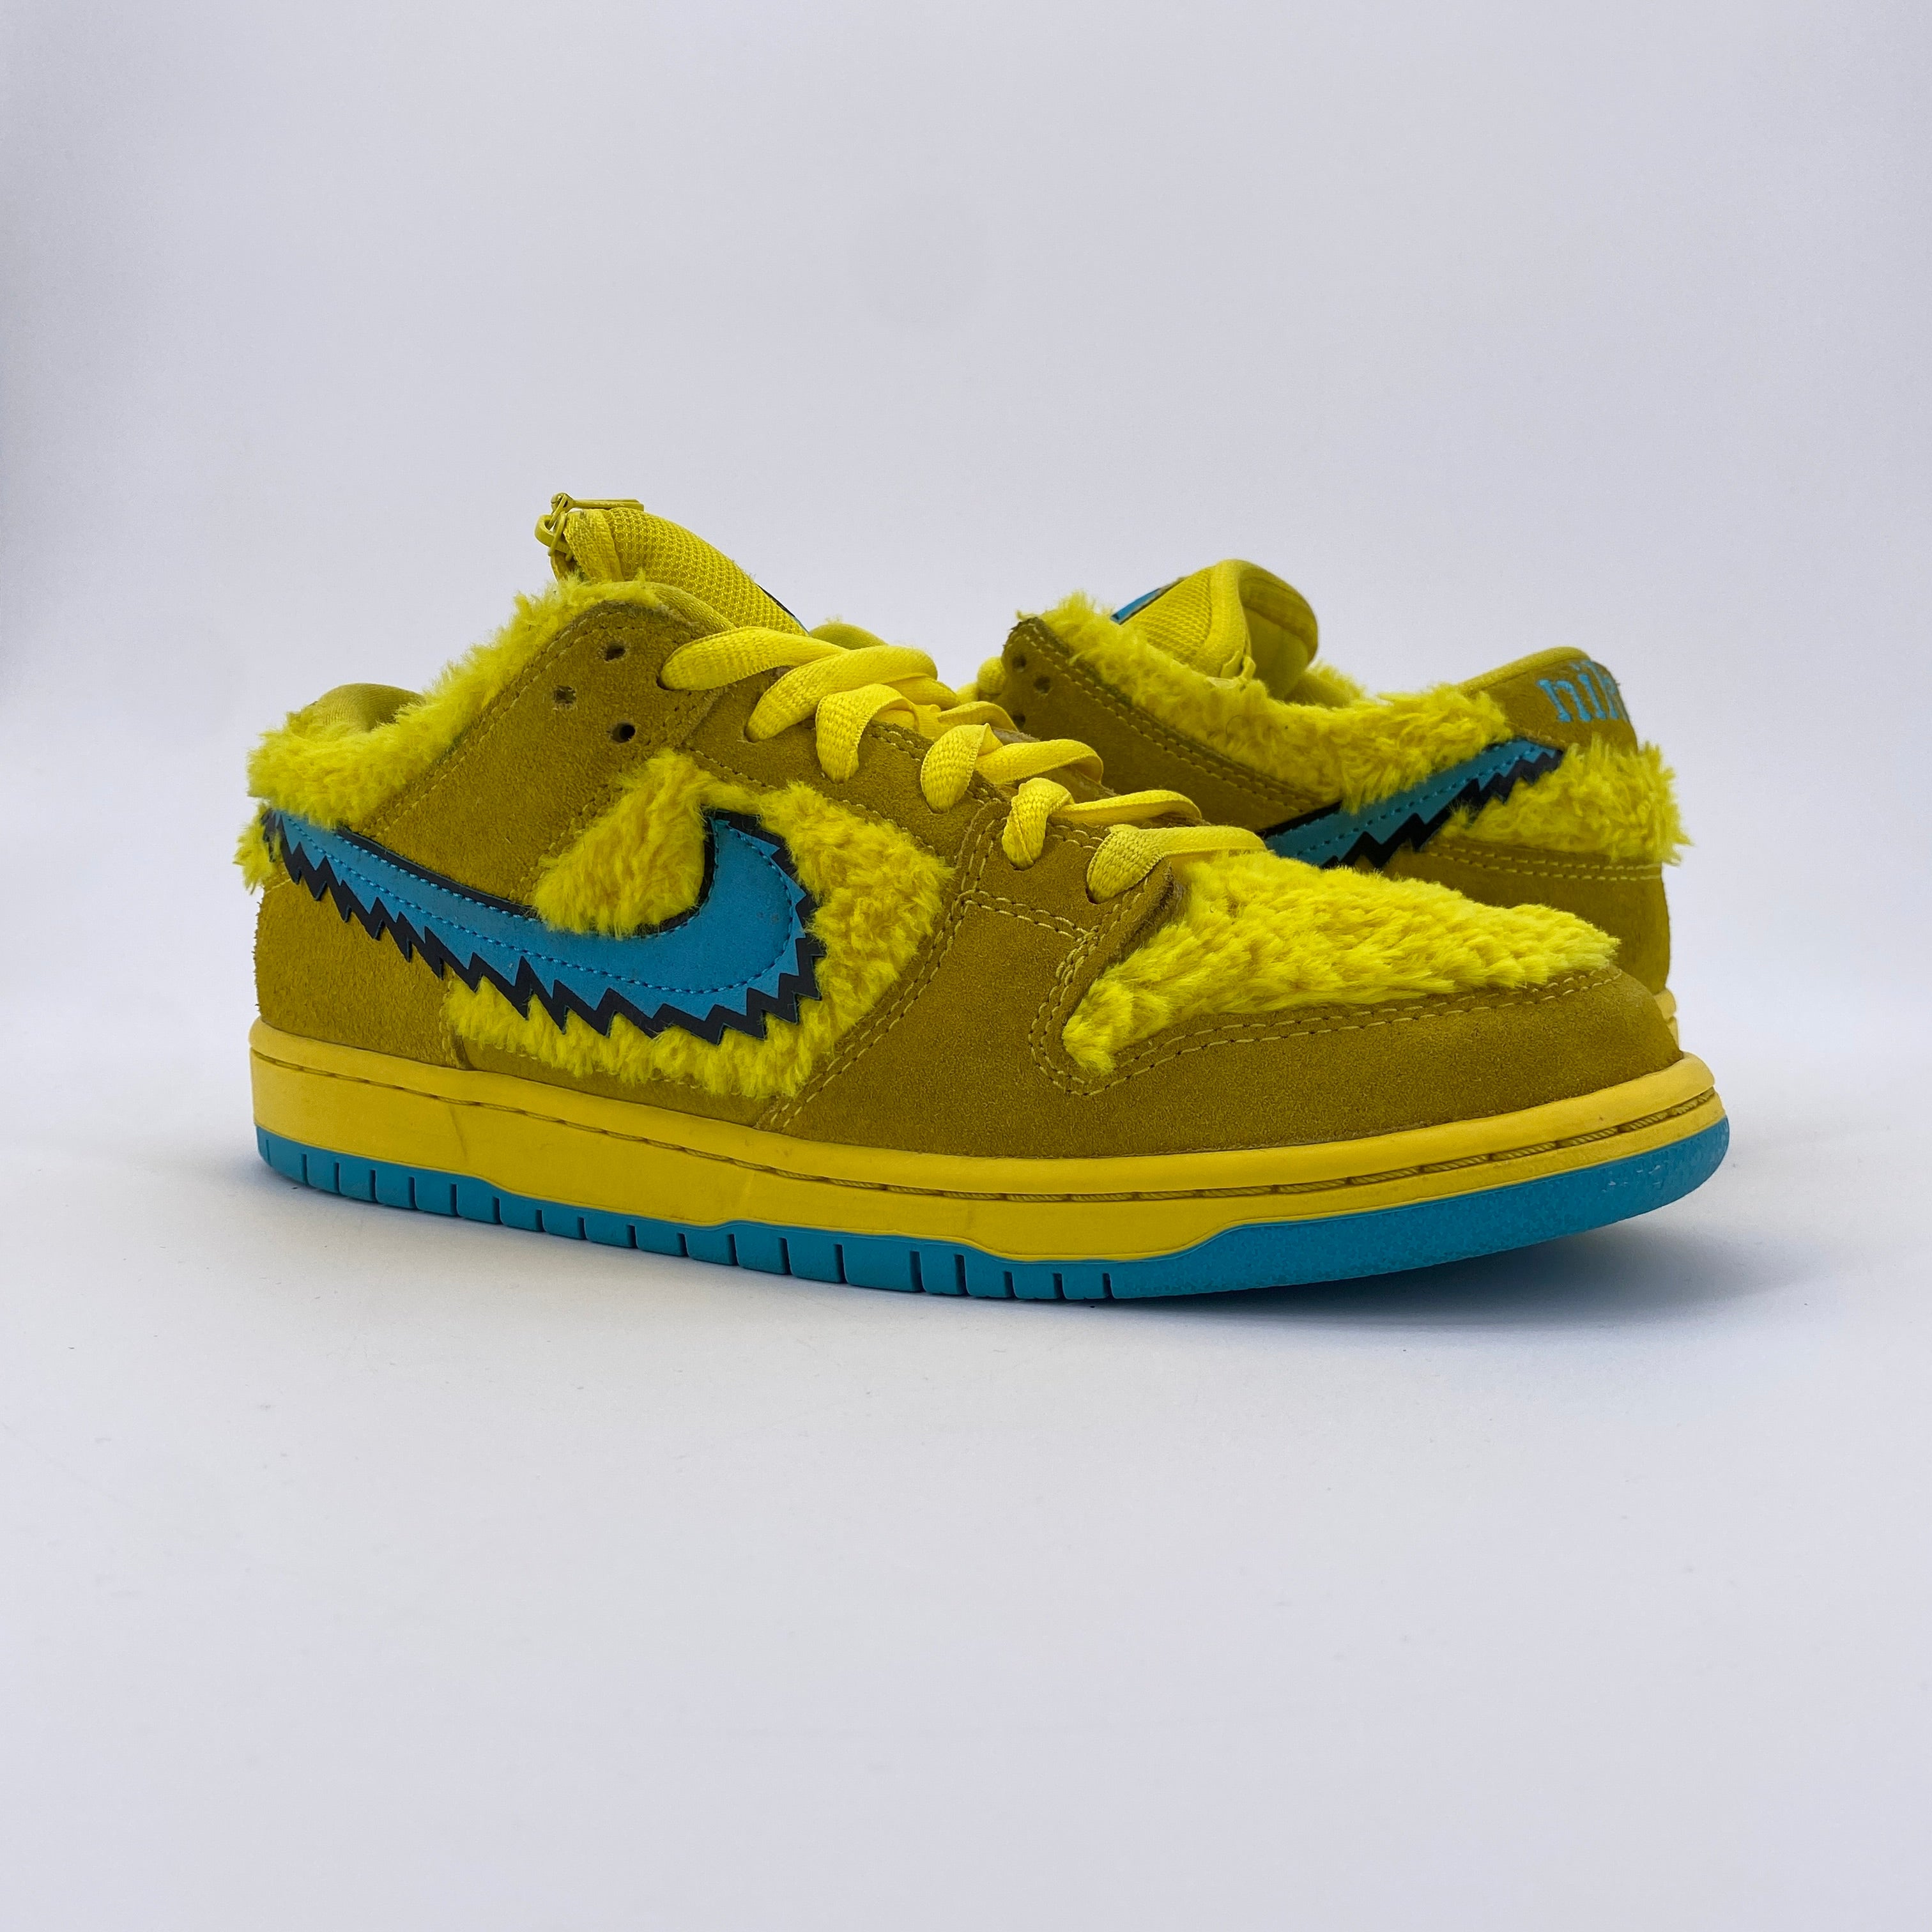 Nike SB Dunk Low "Grateful Dead Yellow" 2020 Used Size 8